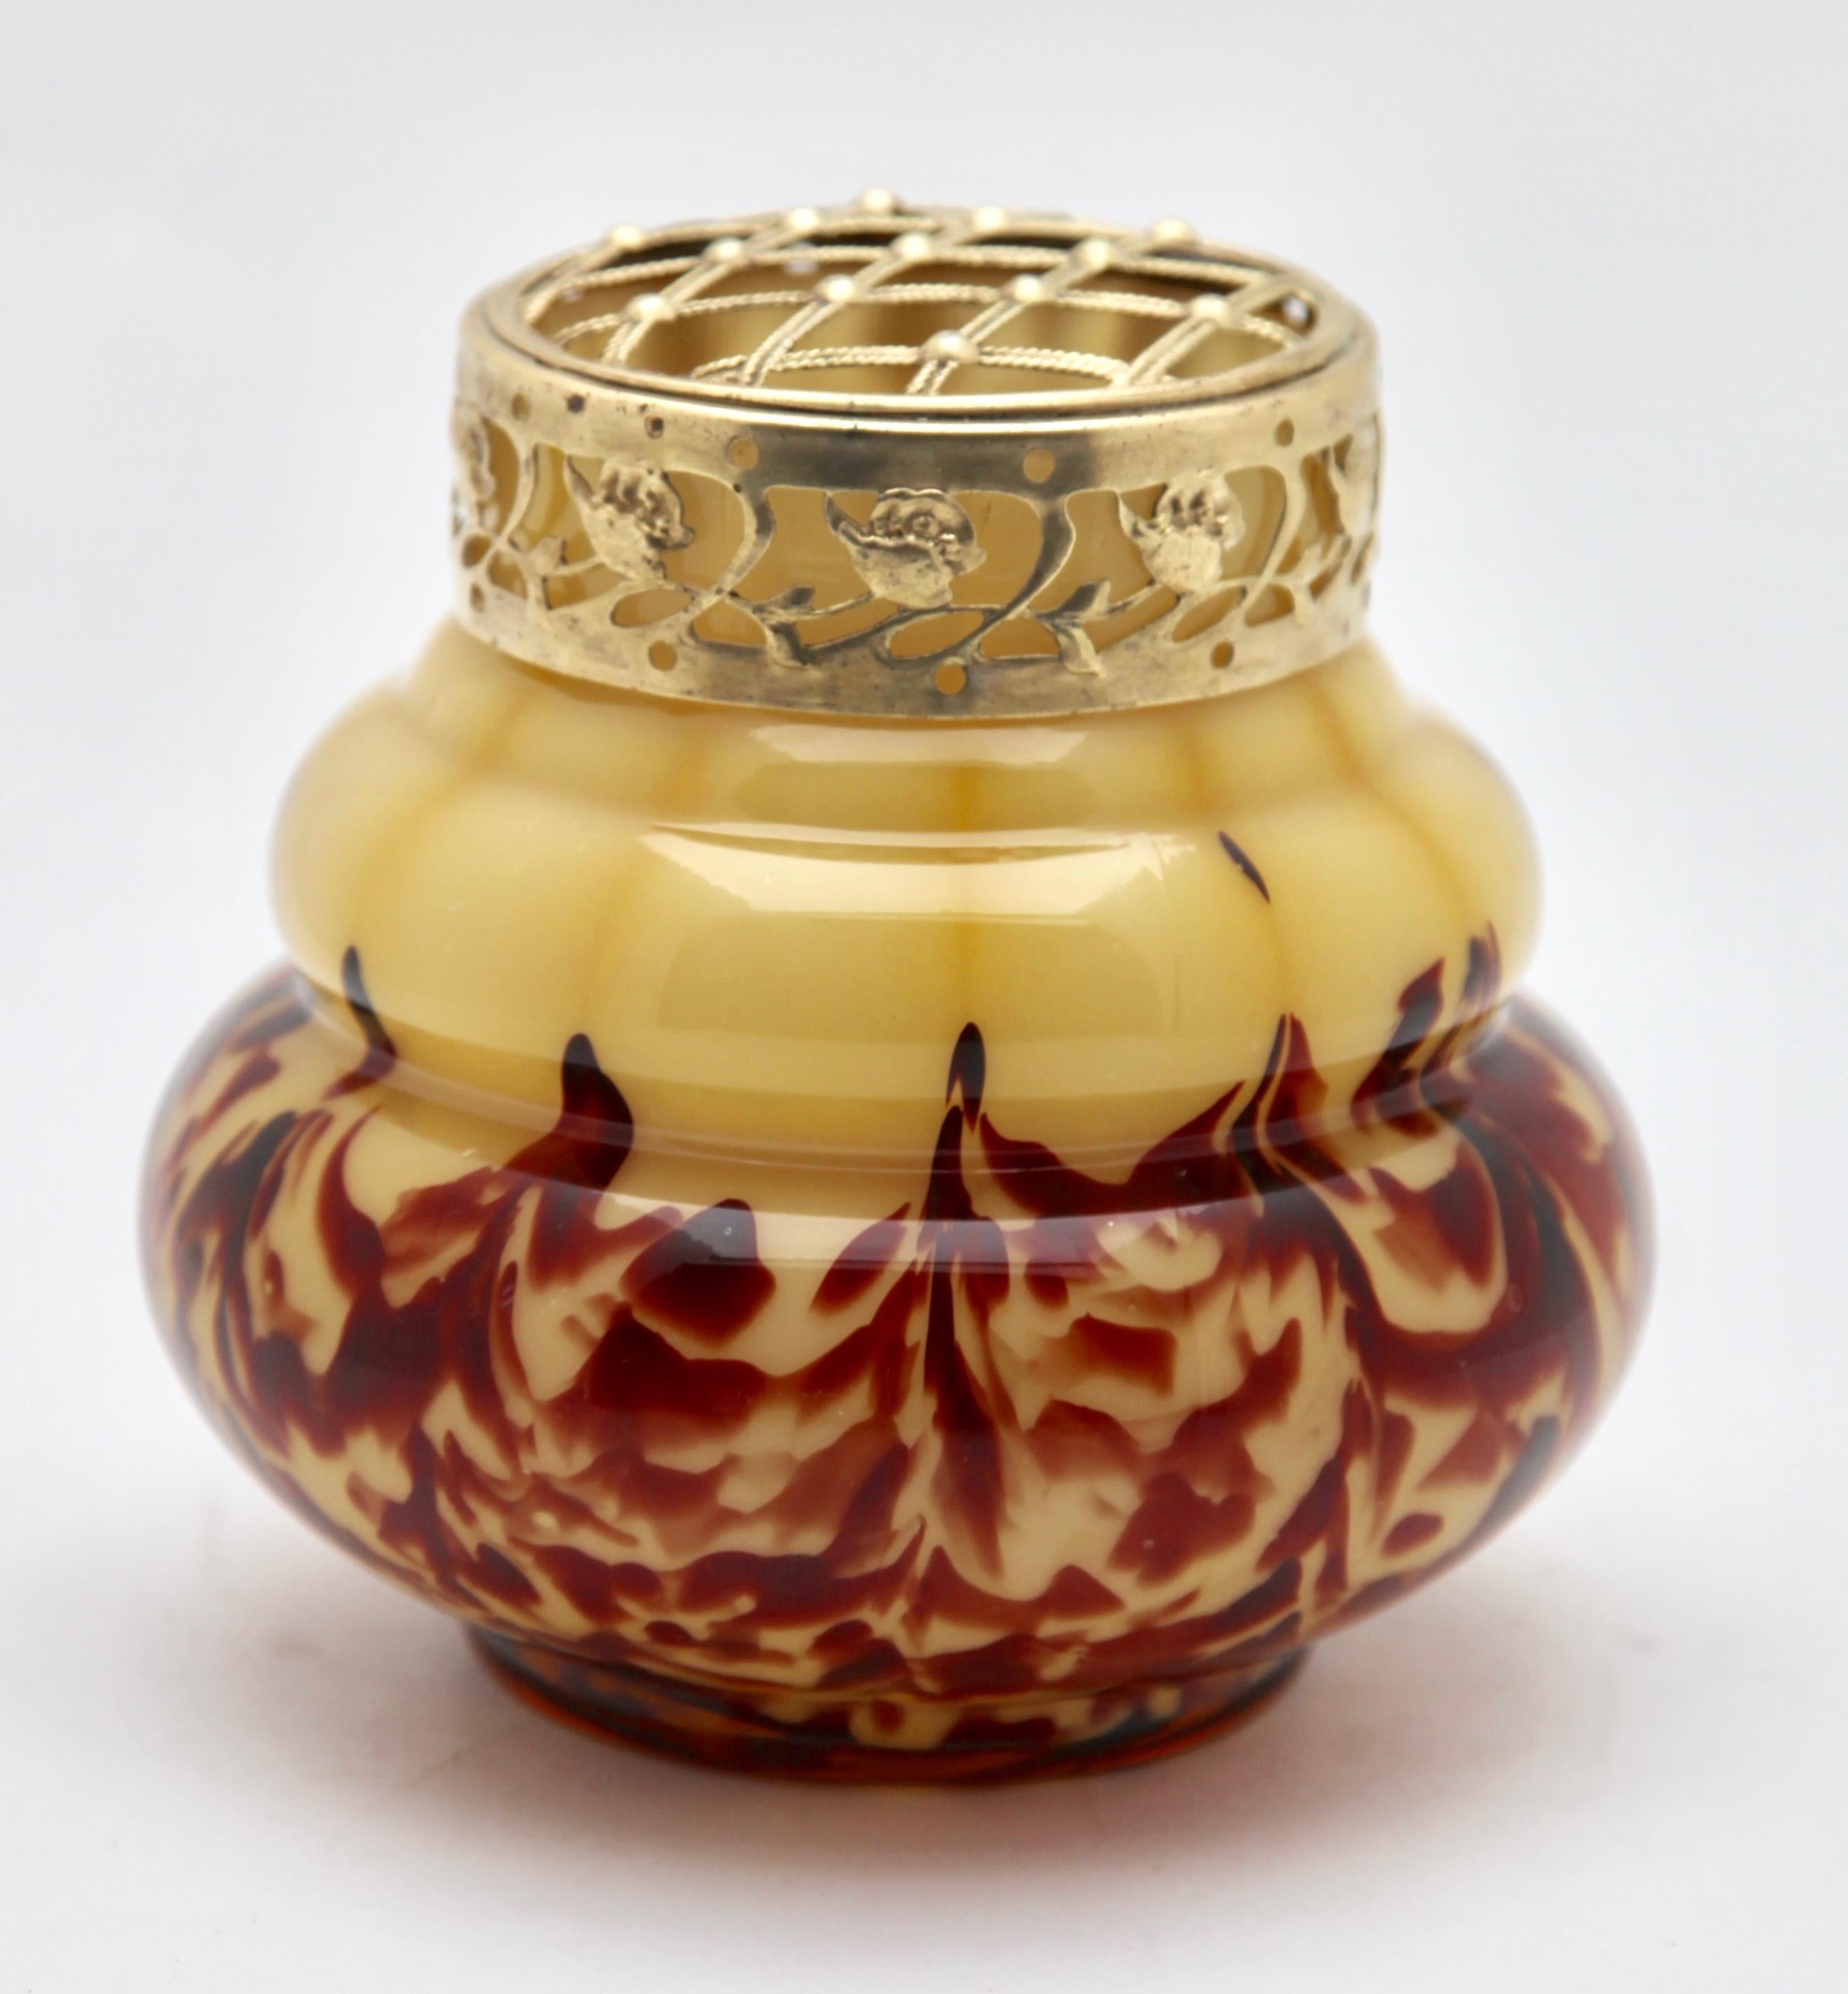 Czech 'Pique Fleurs' Vase, with 'Coffee and Caramel' Decor, with Grille, Late 1930s